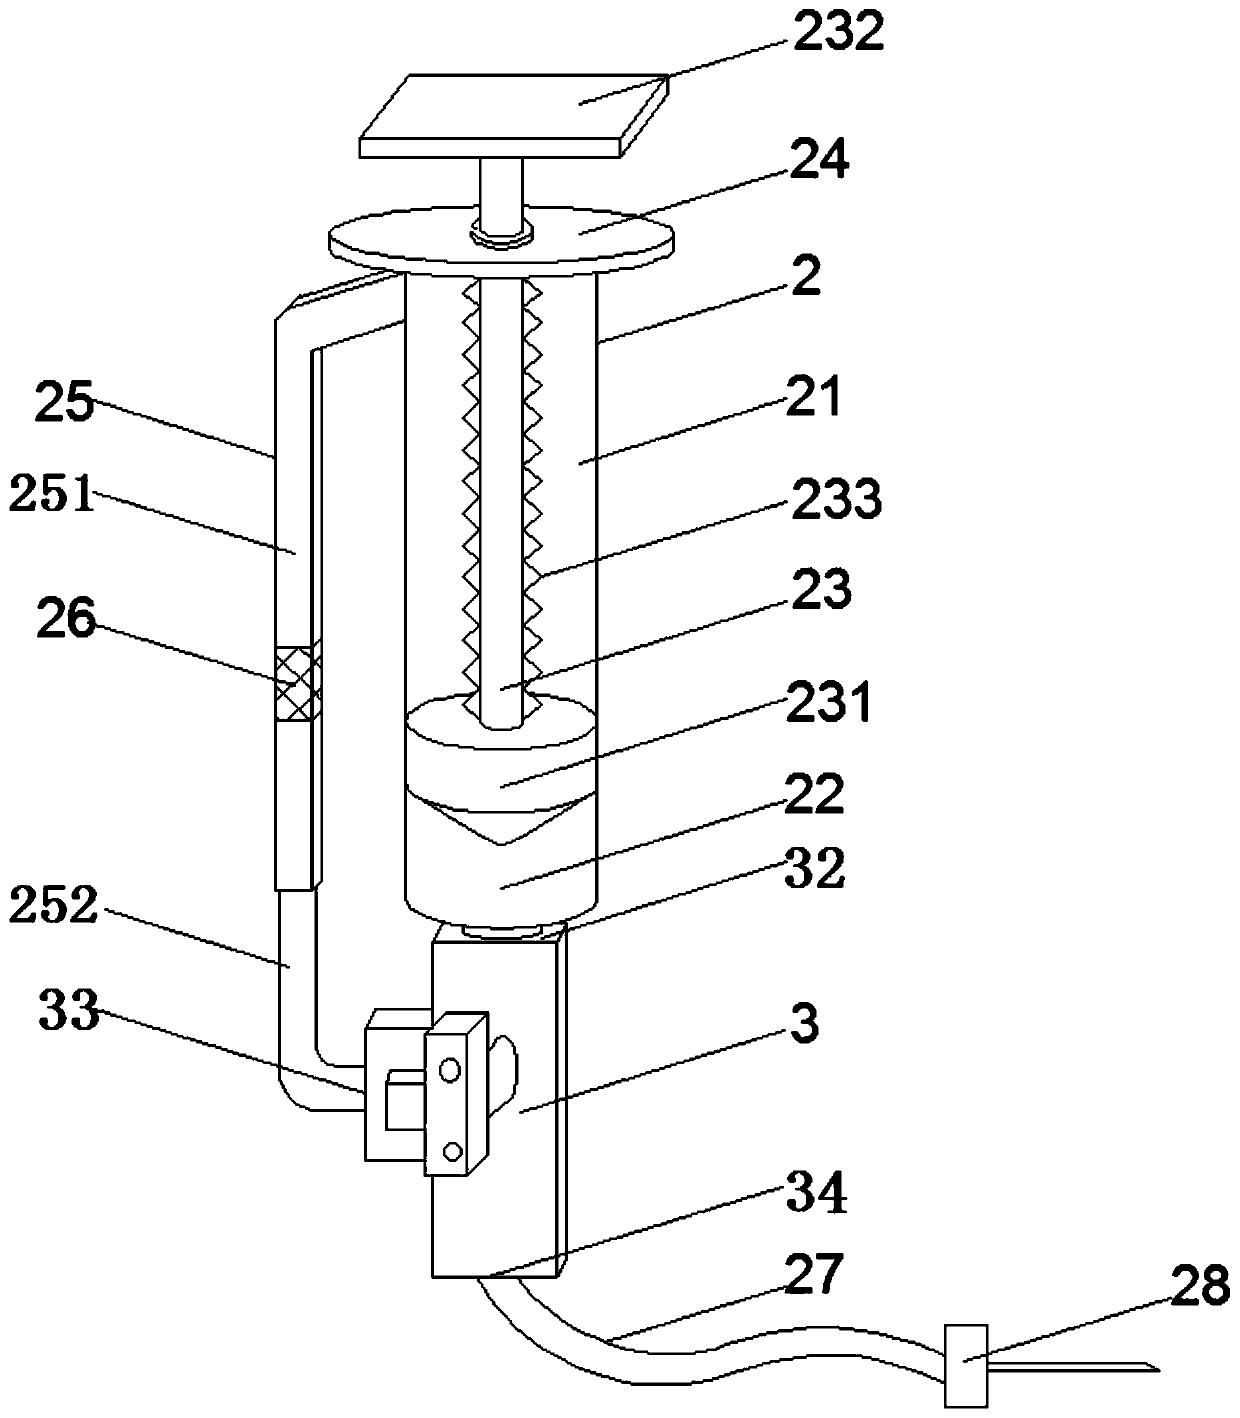 Single-barrel automatic angiography injector